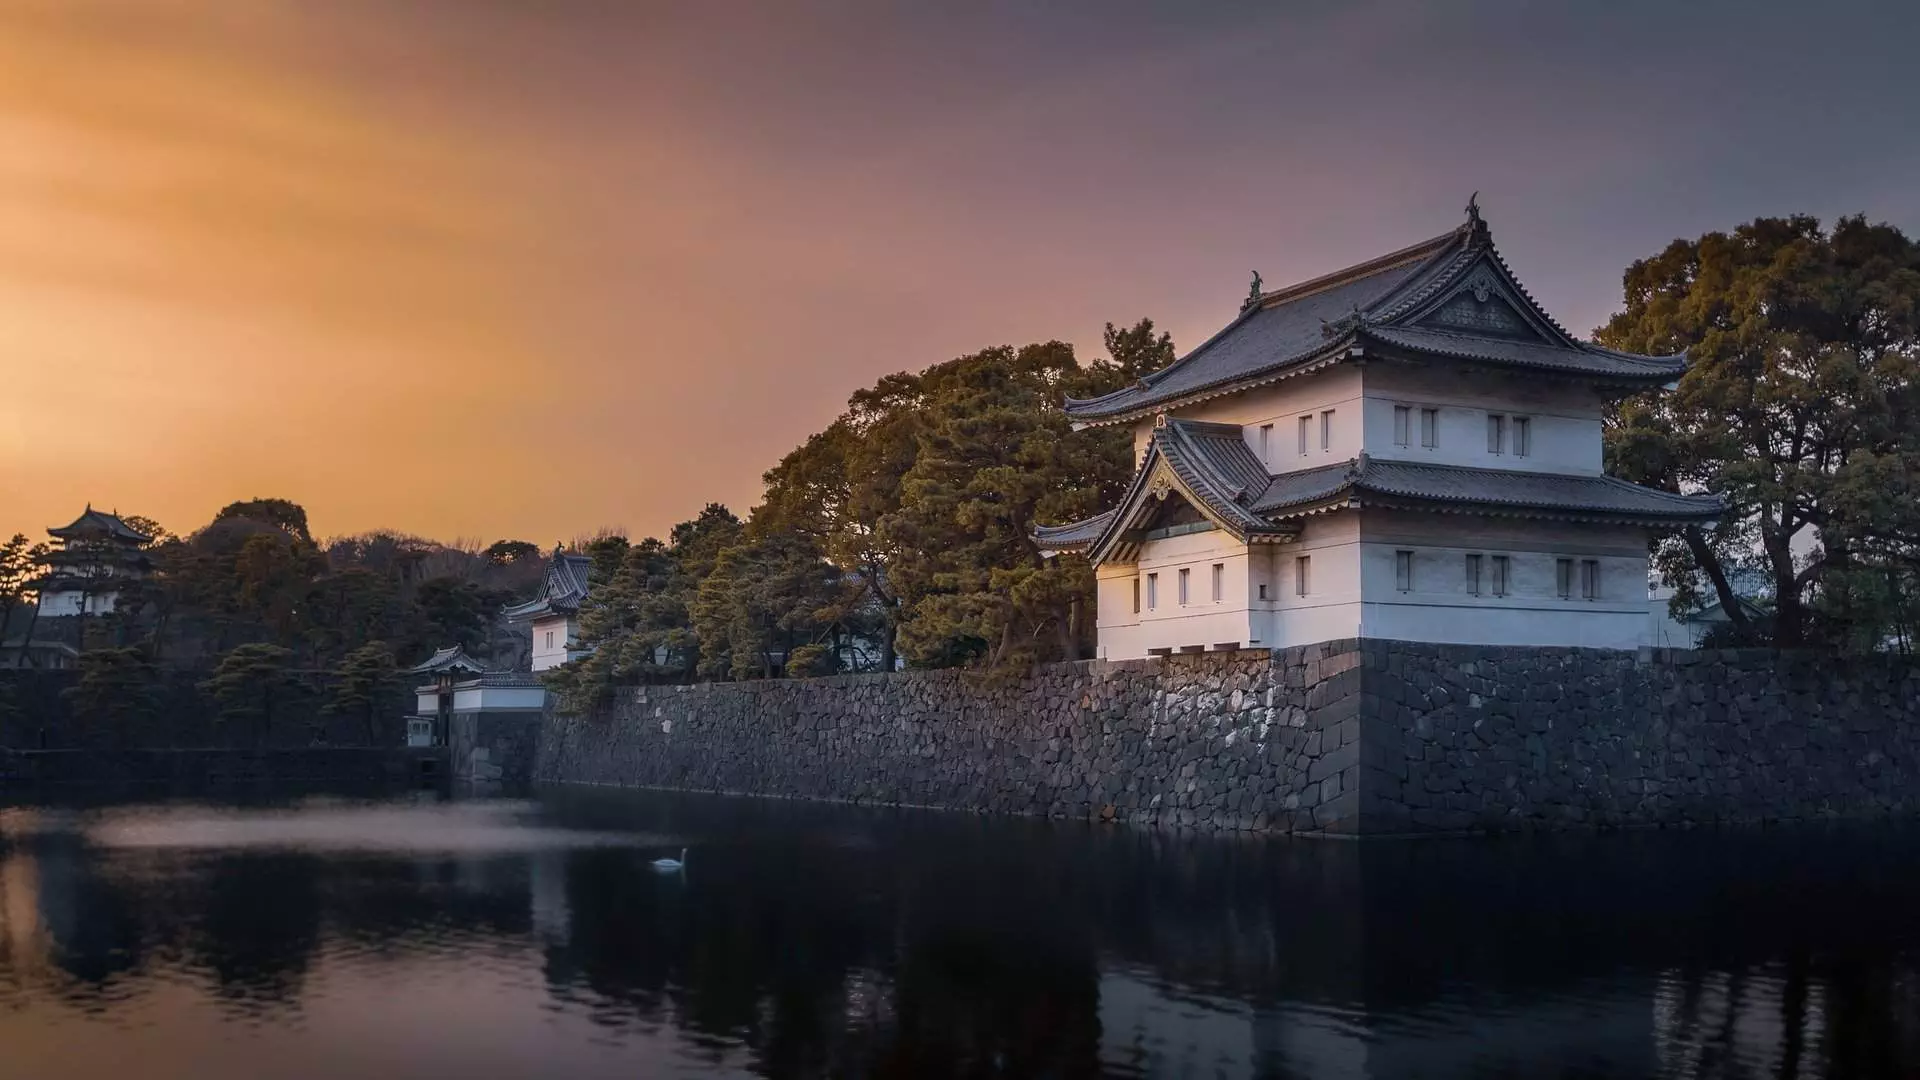 Places in Tokyo, Imperial Palace